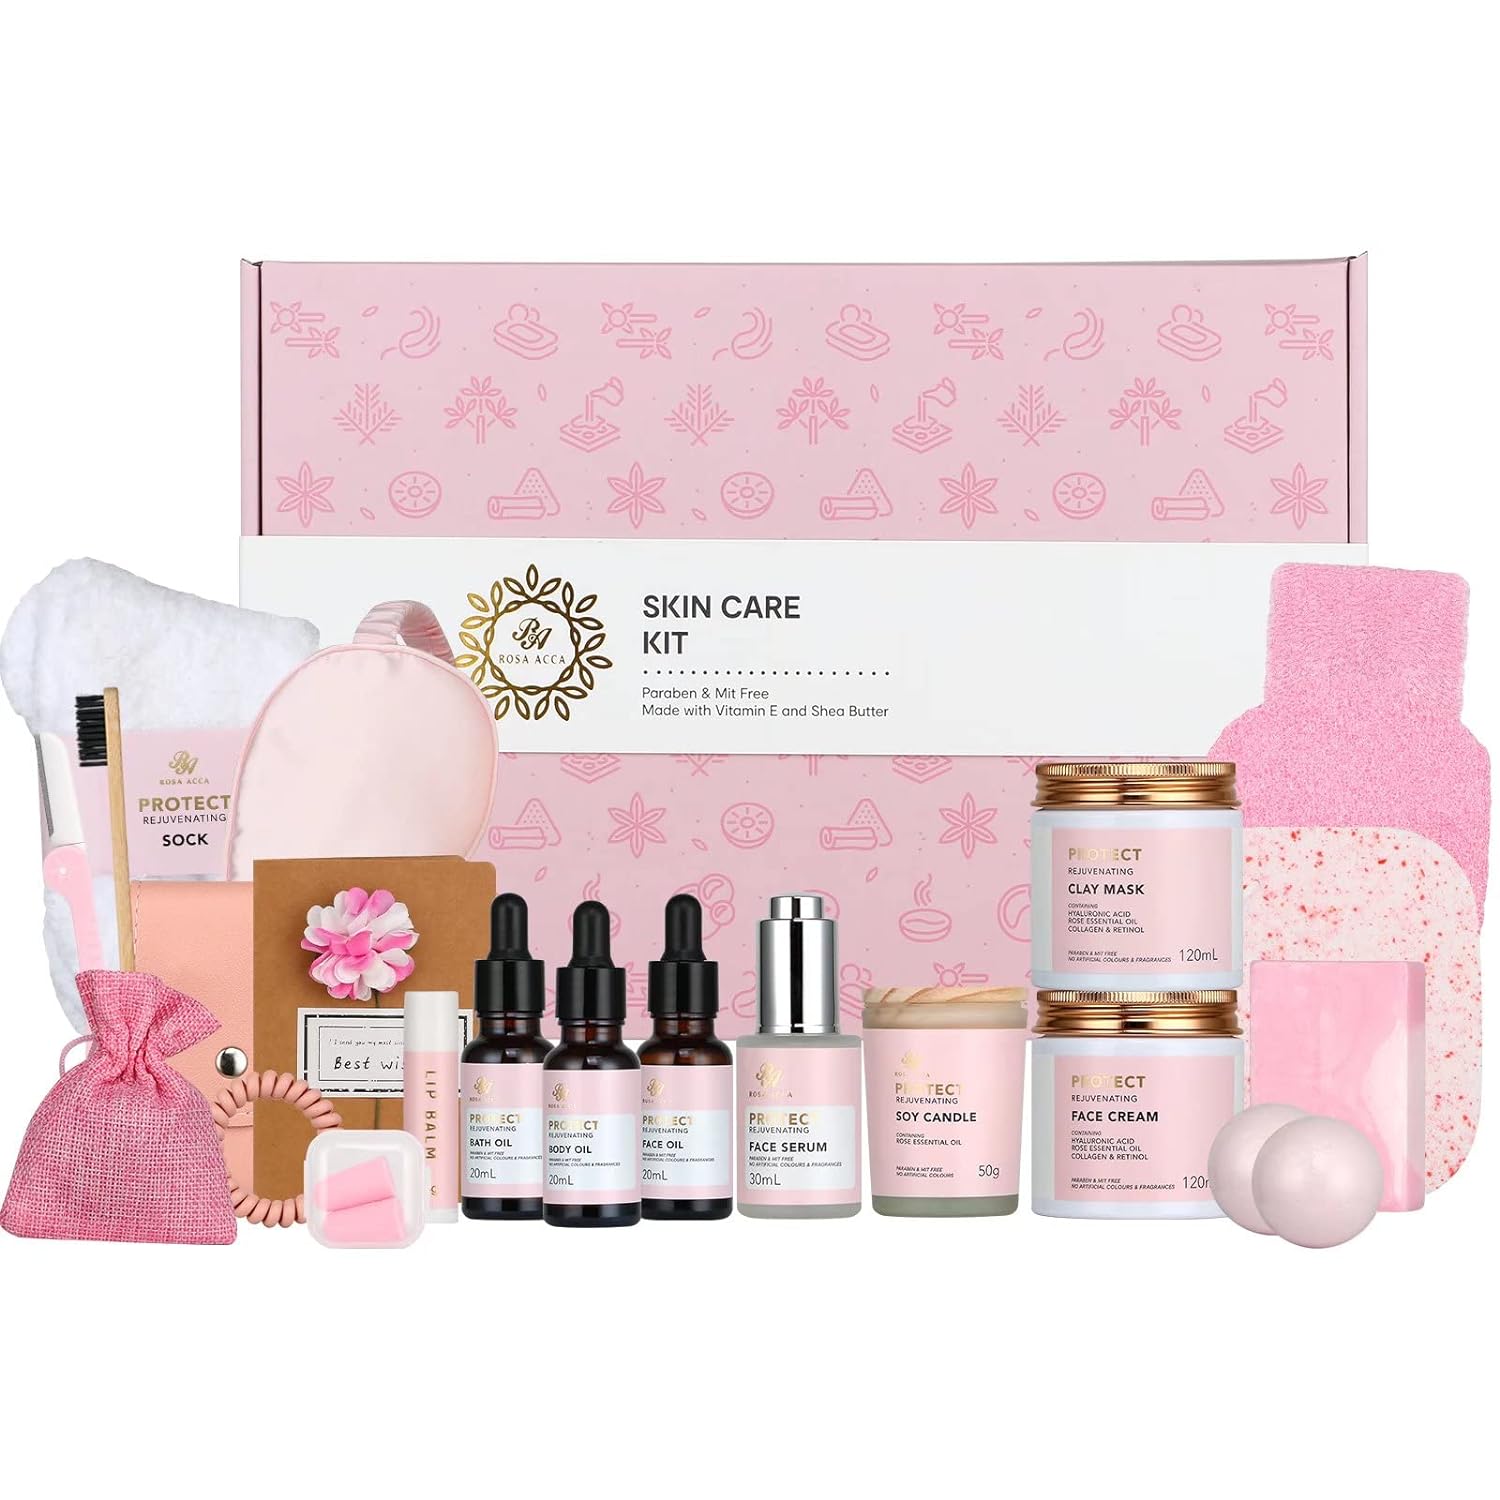 Facial Skin Care Set & Bath Spa Kit, Bath and Body At Home Spa Kit, Mothers Day Gifts Ideas, Self-care Relaxation Gift, Skin Care Collection plus essential oil, Hyaluronic Acid, Vitamin E.(Rose)